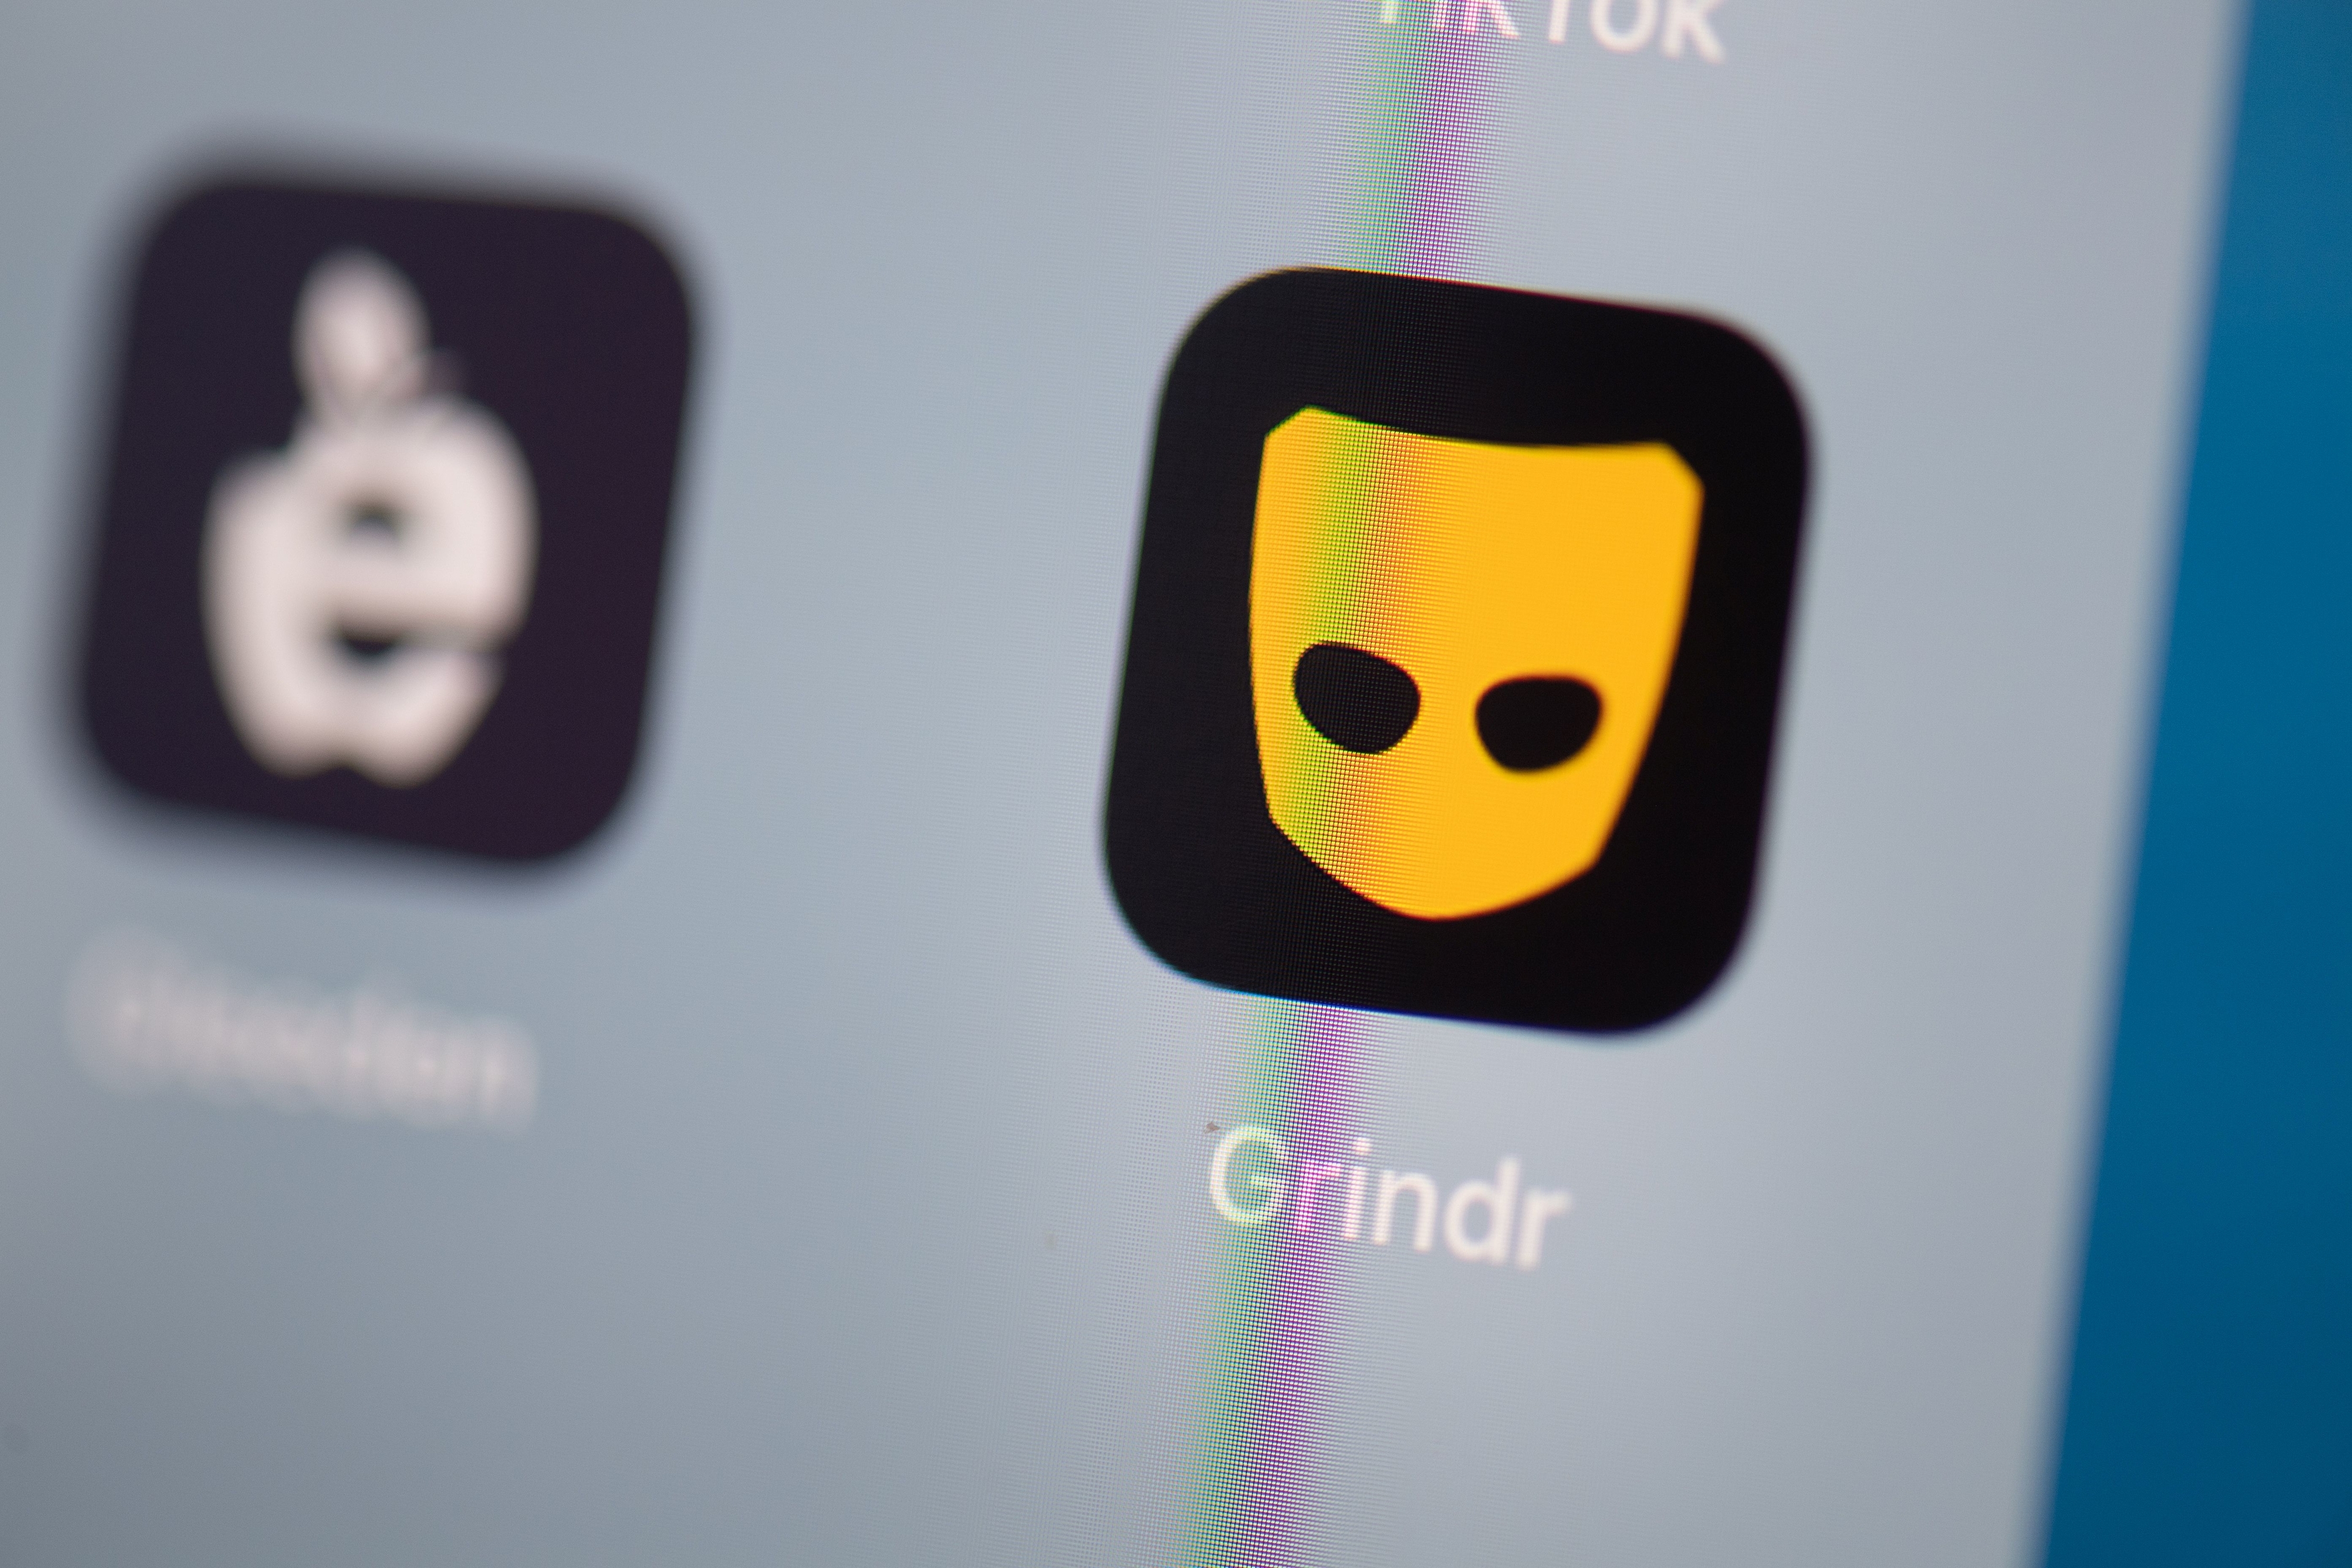 The Grindr app